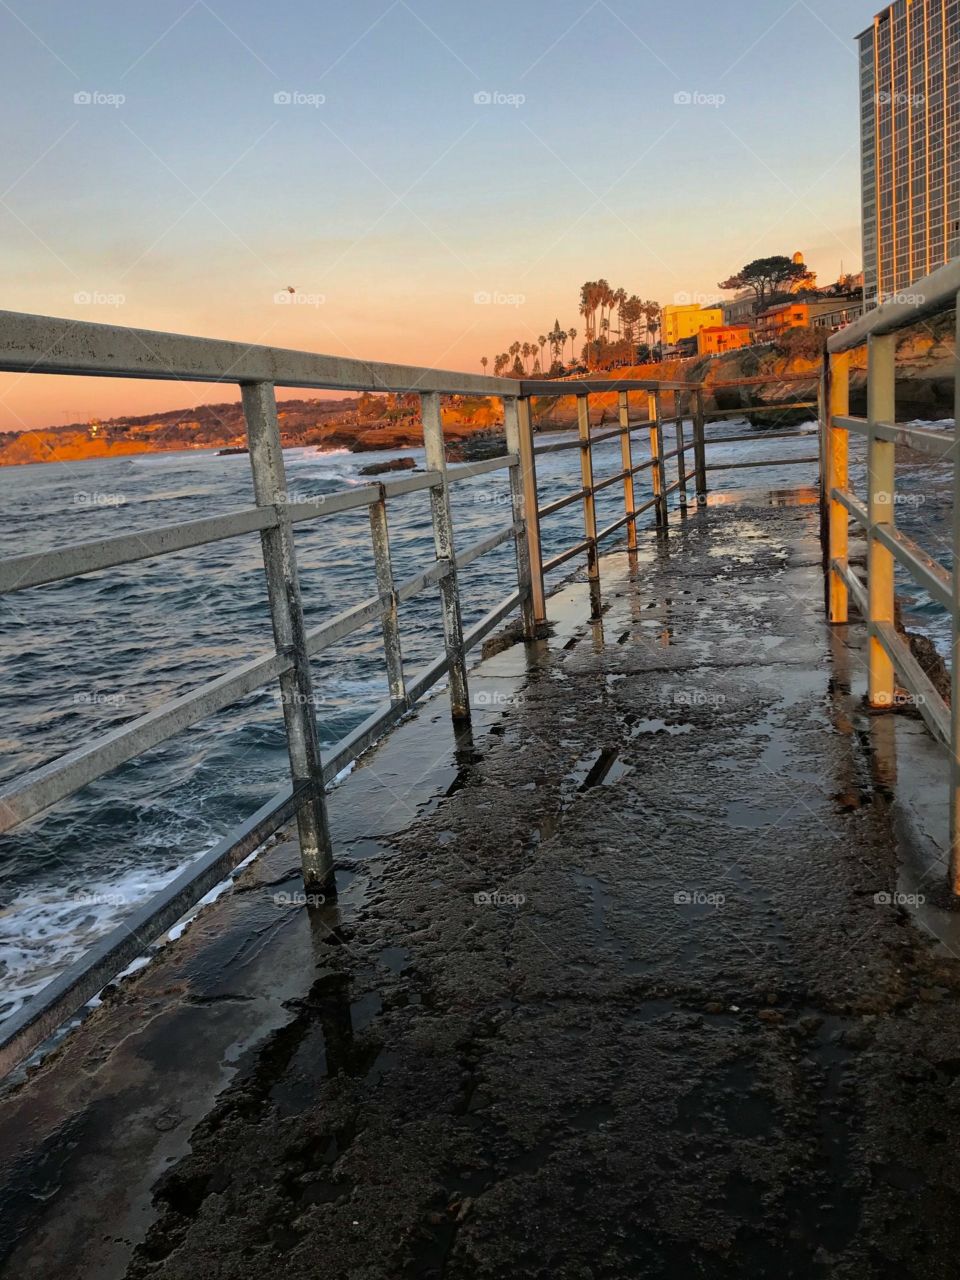 A Pier with the water washing over It during the sun setting!